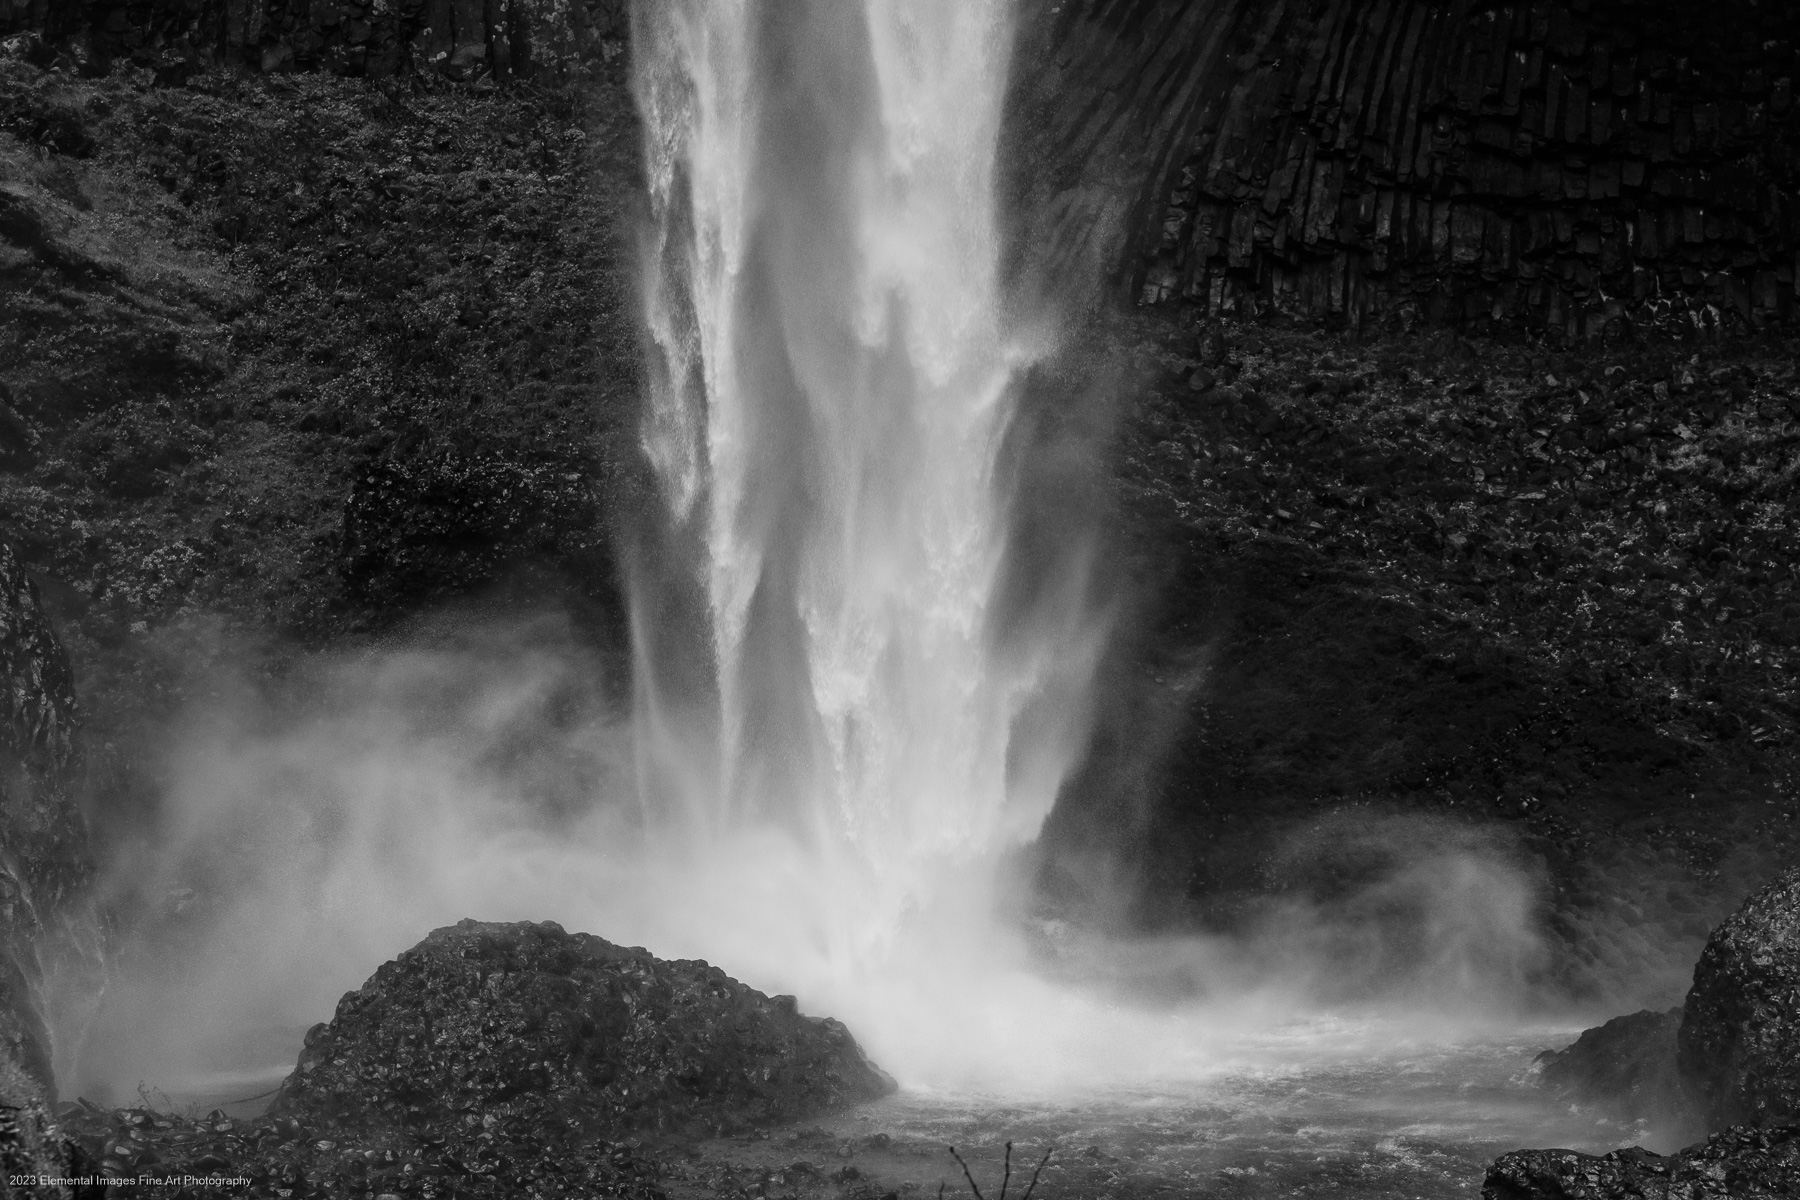 Waterfalls Study 22 | Columbia River Gorge National Scenic Area | OR | USA - © 2023 Elemental Images Fine Art Photography - All Rights Reserved Worldwide